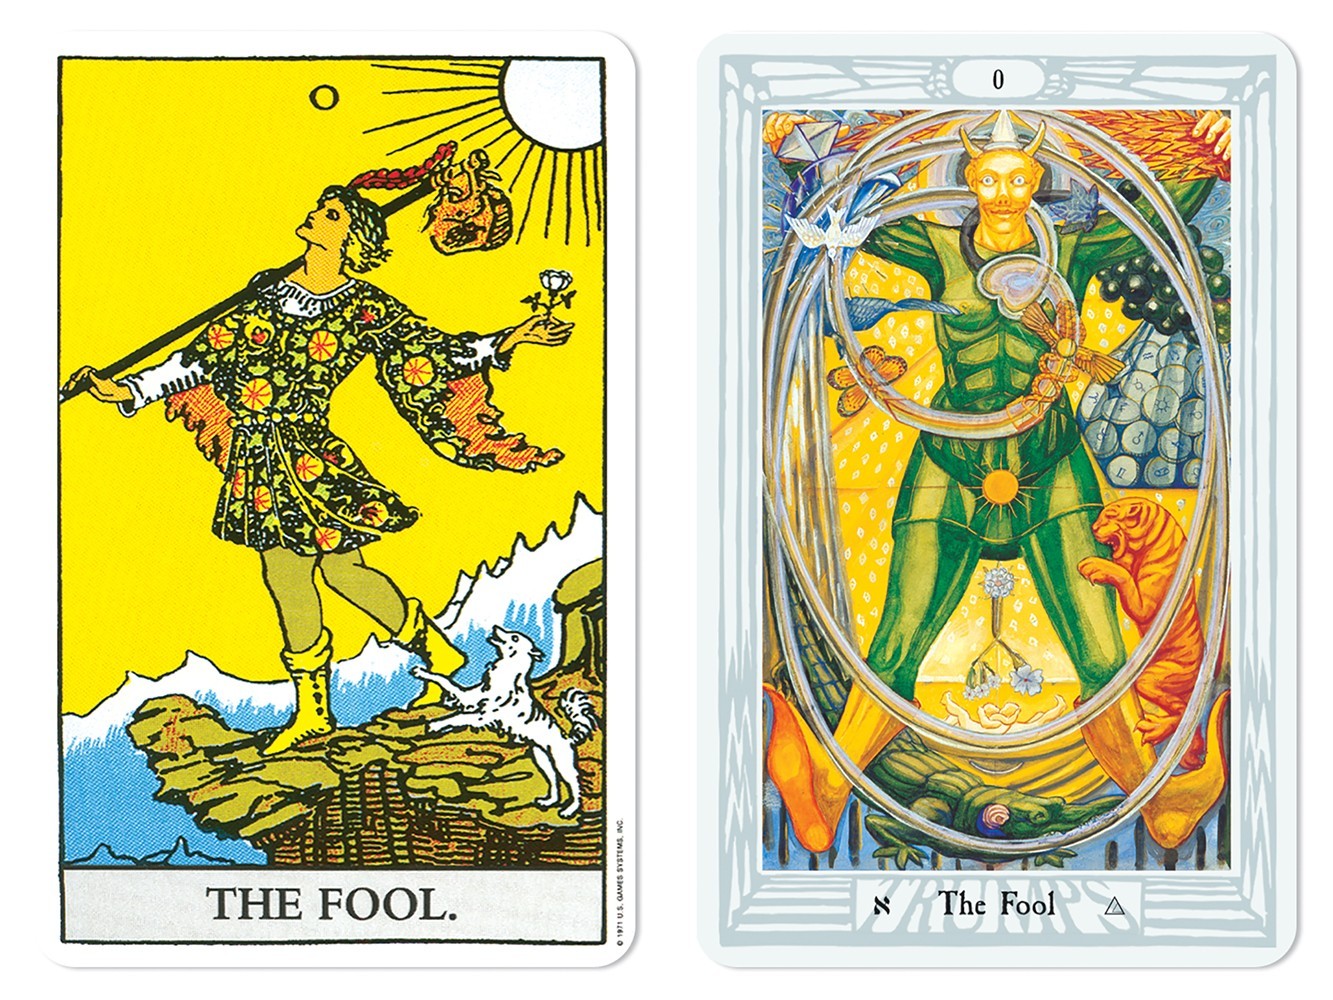 Side-by-side of Rider-Waite and Thoth cards of The Fool